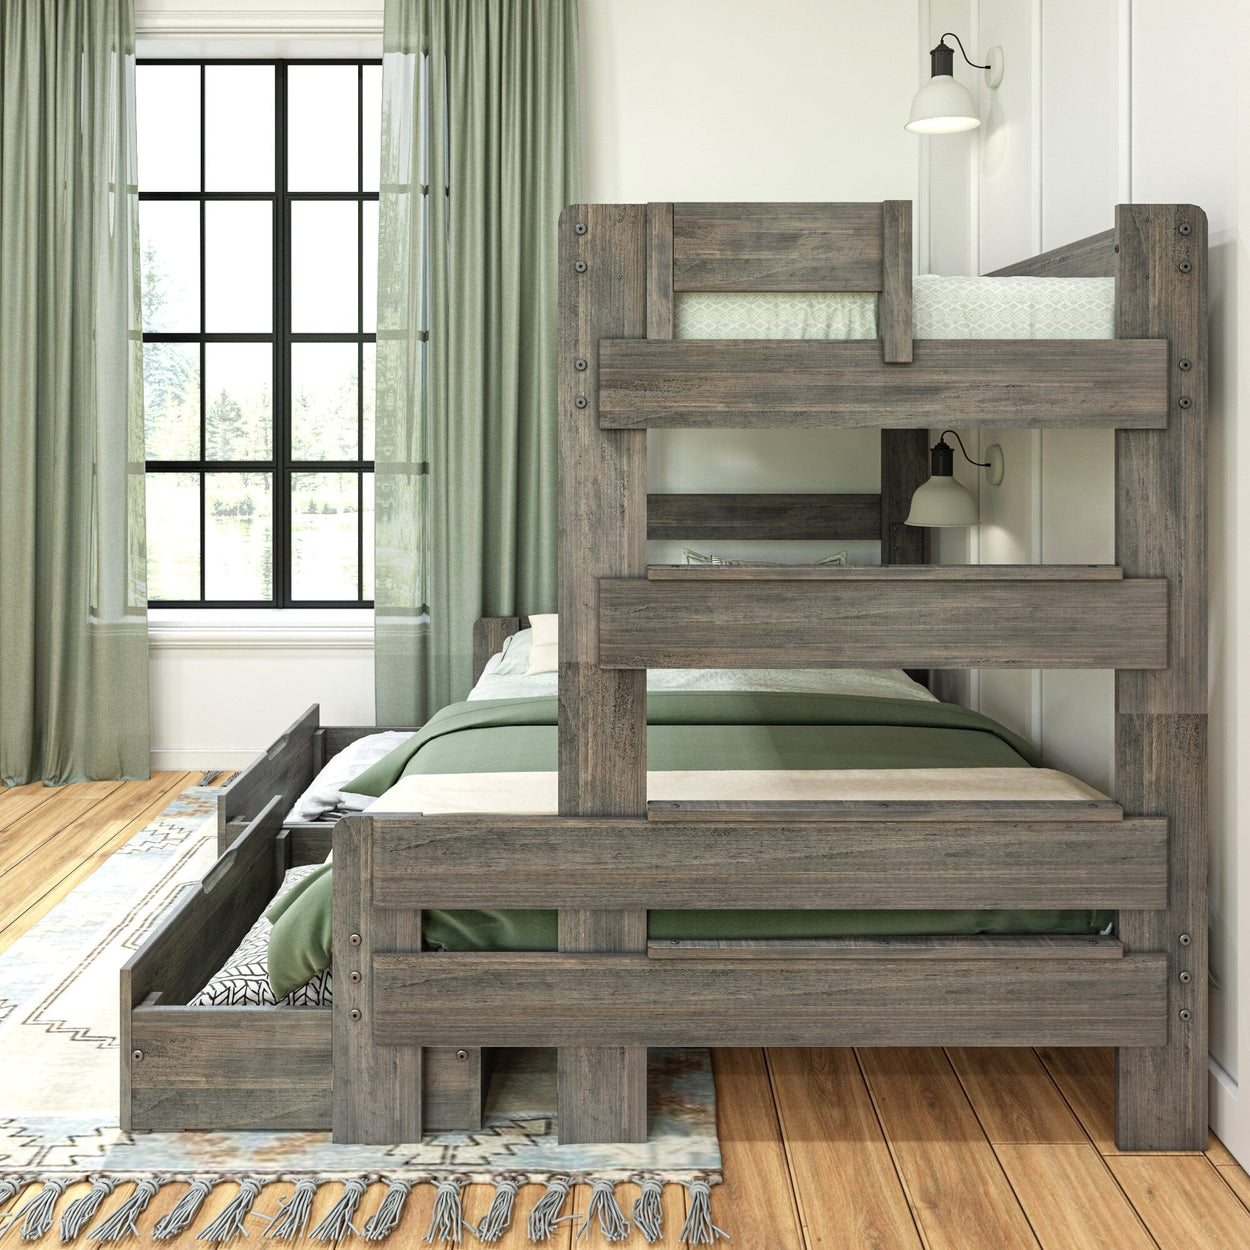 197231-185 : Bunk Beds Farmhouse Twin over Full Bunk Bed with Storage Drawers, Driftwood